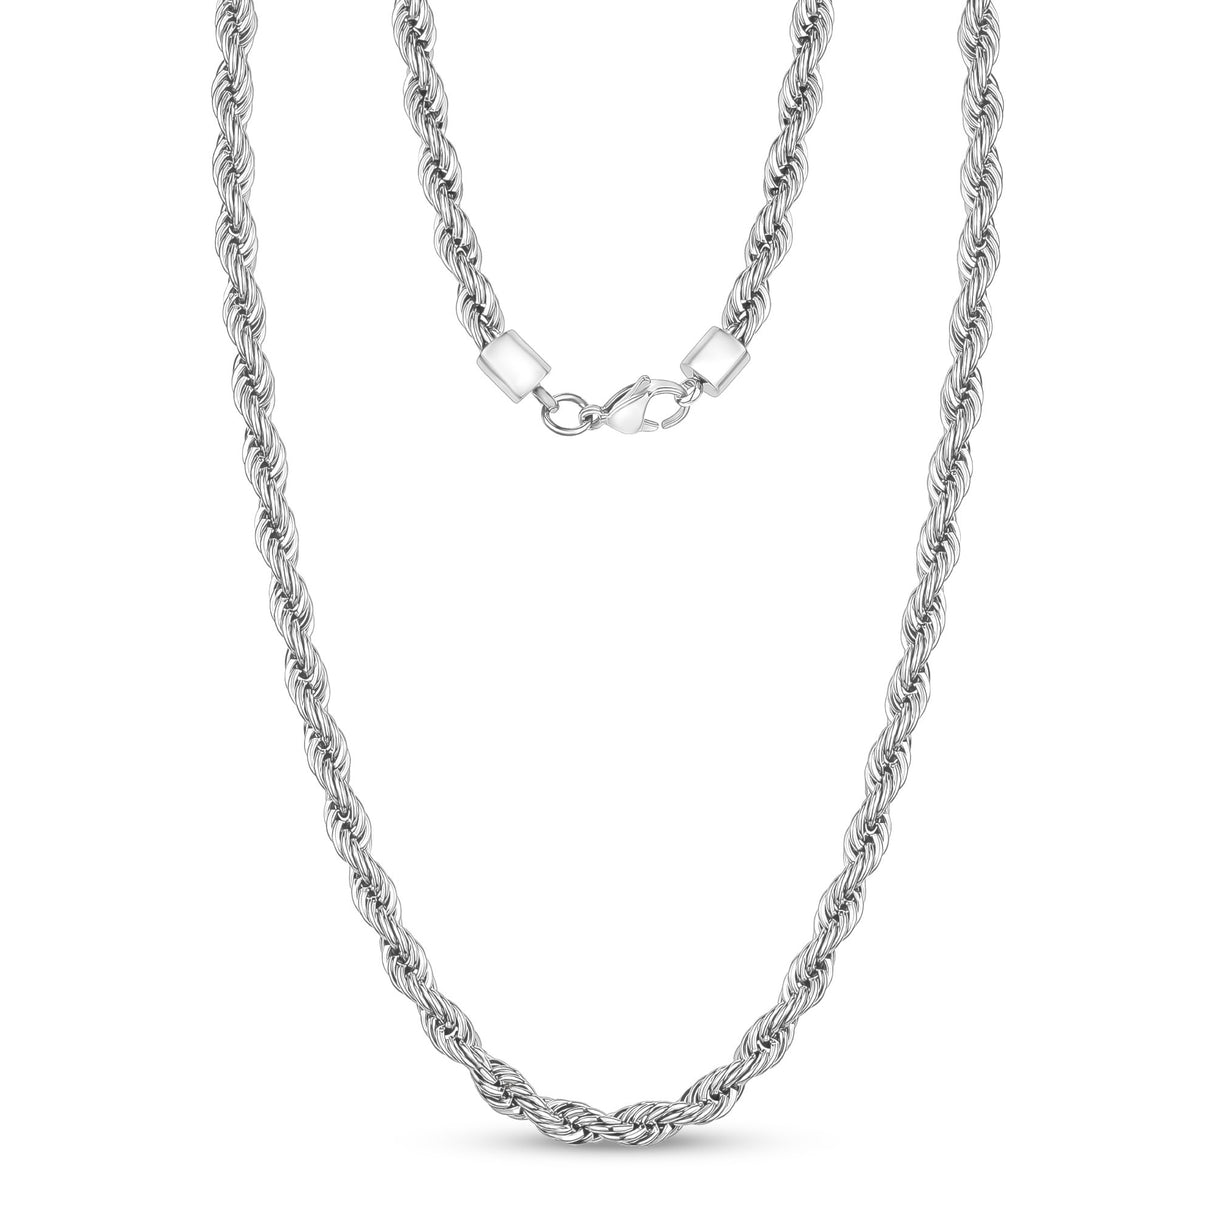 6mm Rope Chain - Men Necklace - The Steel Shop